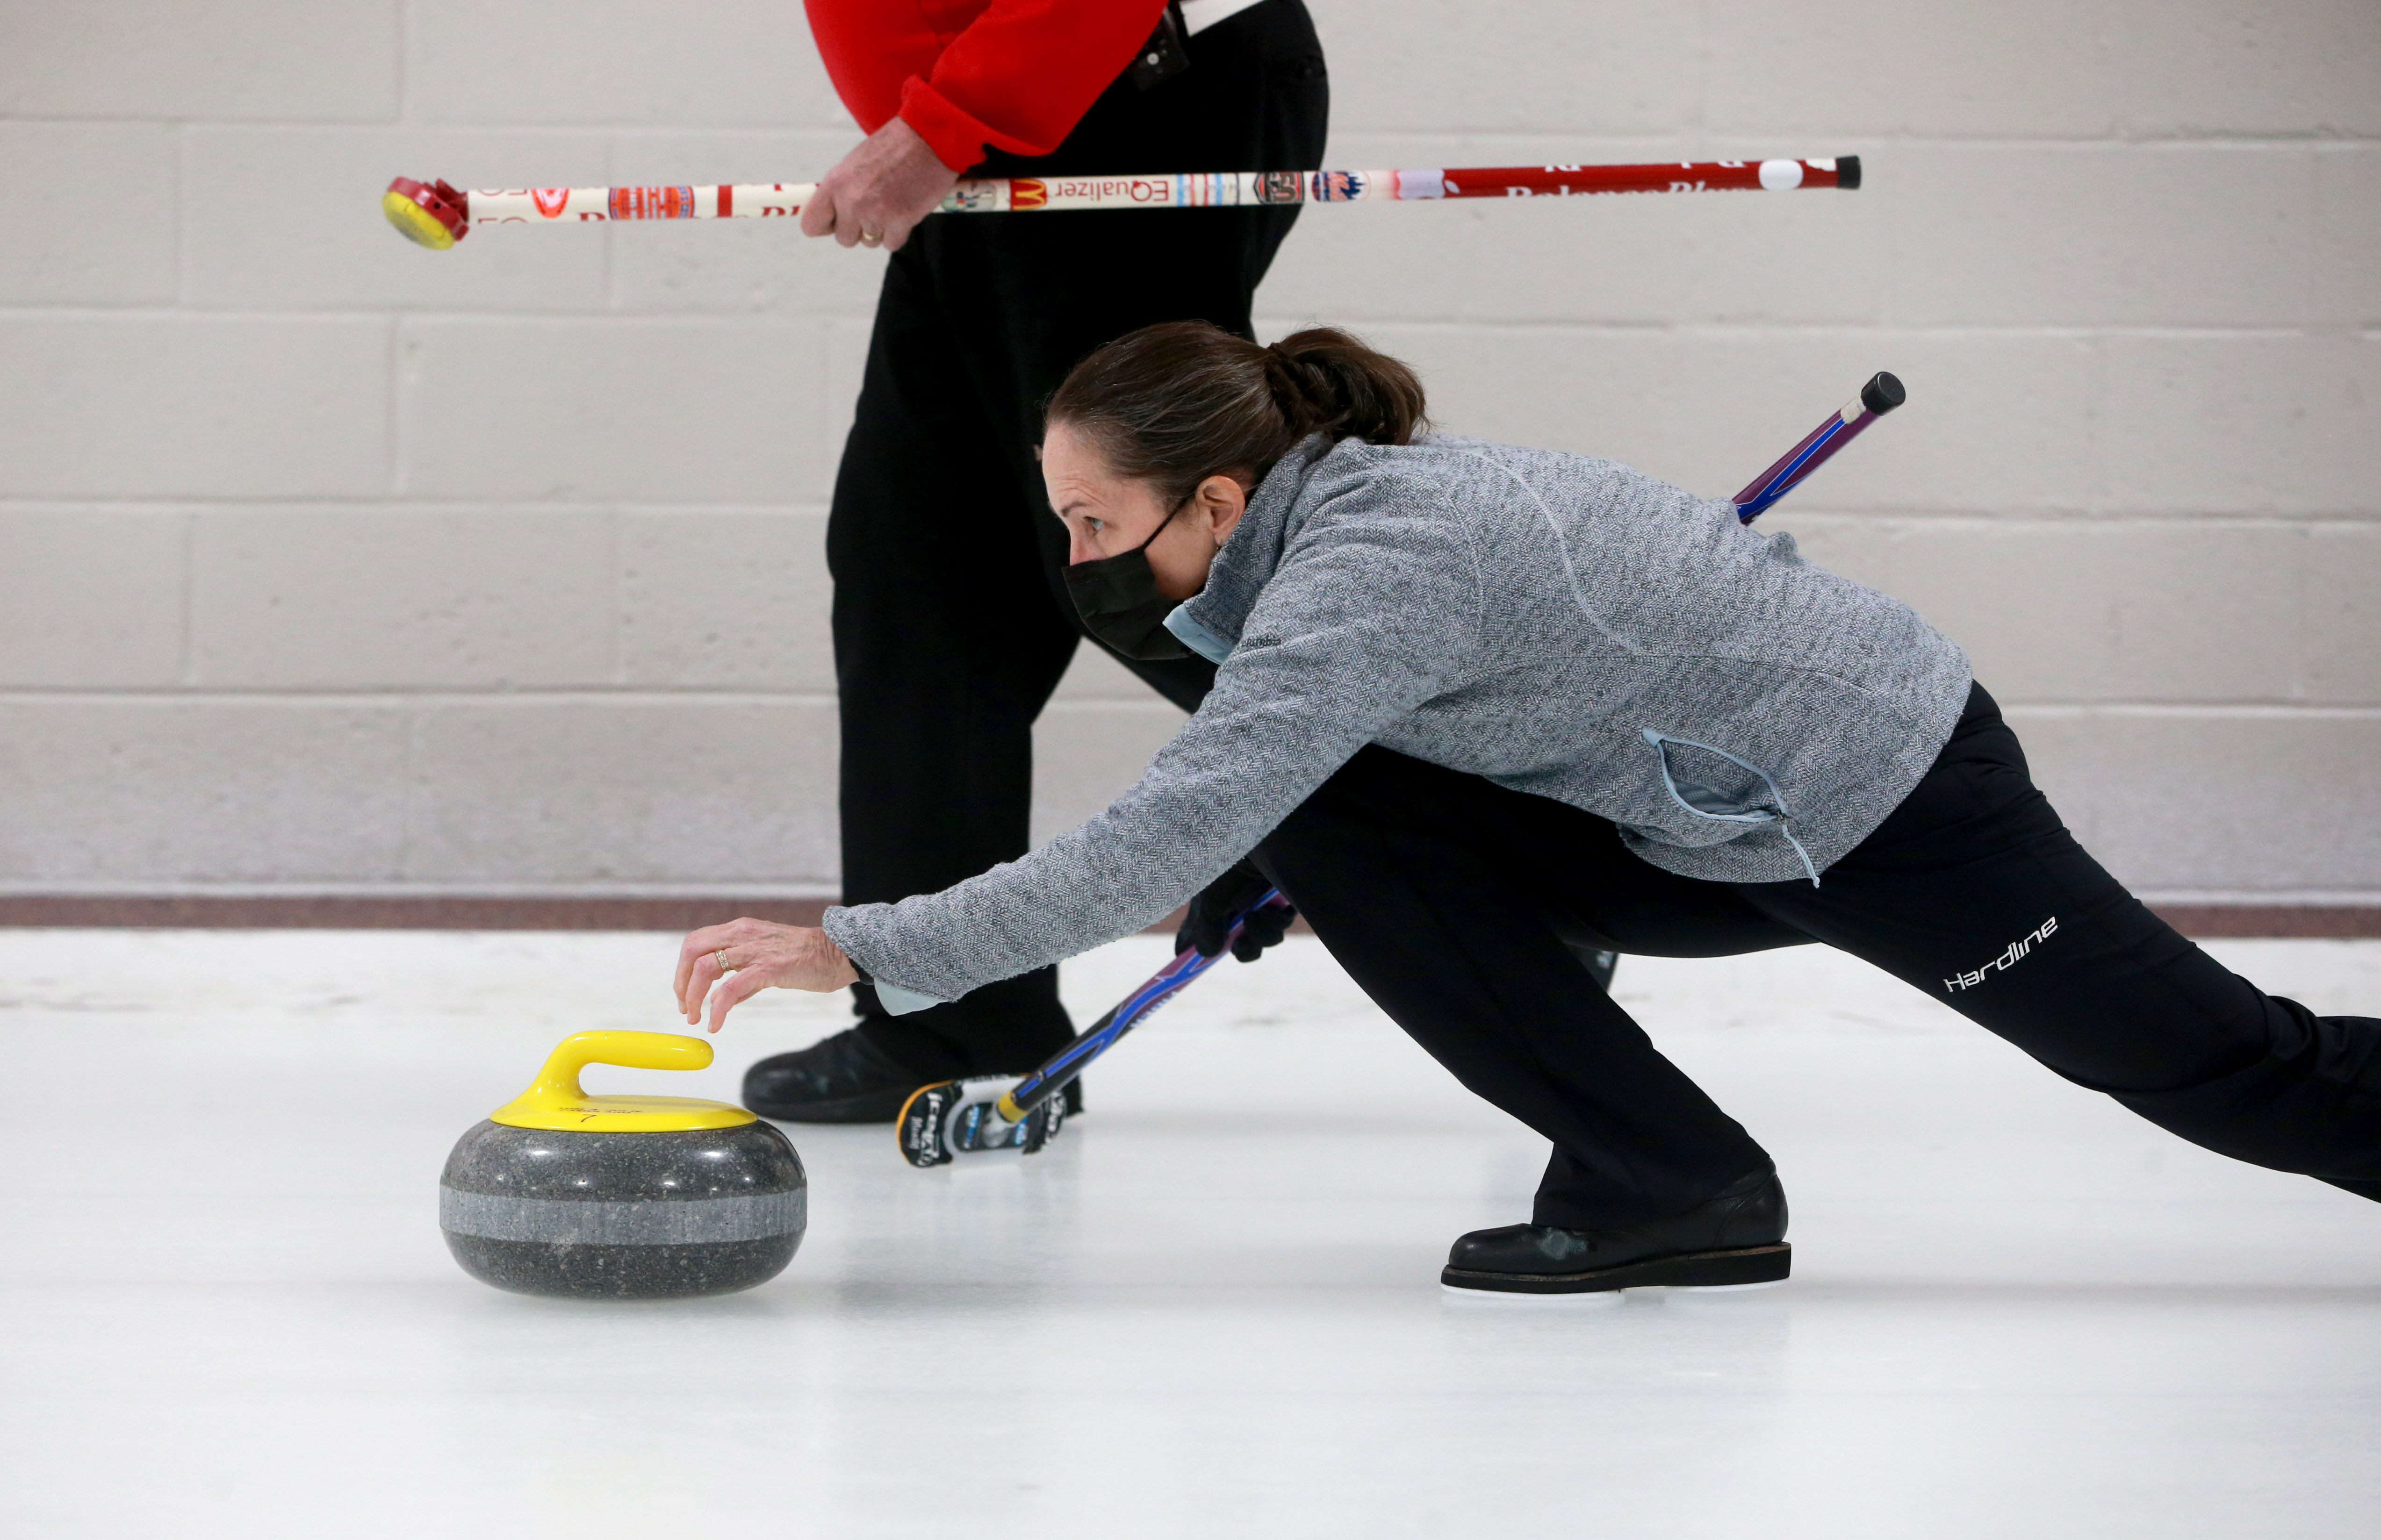 N.J.'s only curling club hosts Kenyan team with Olympic dreams 